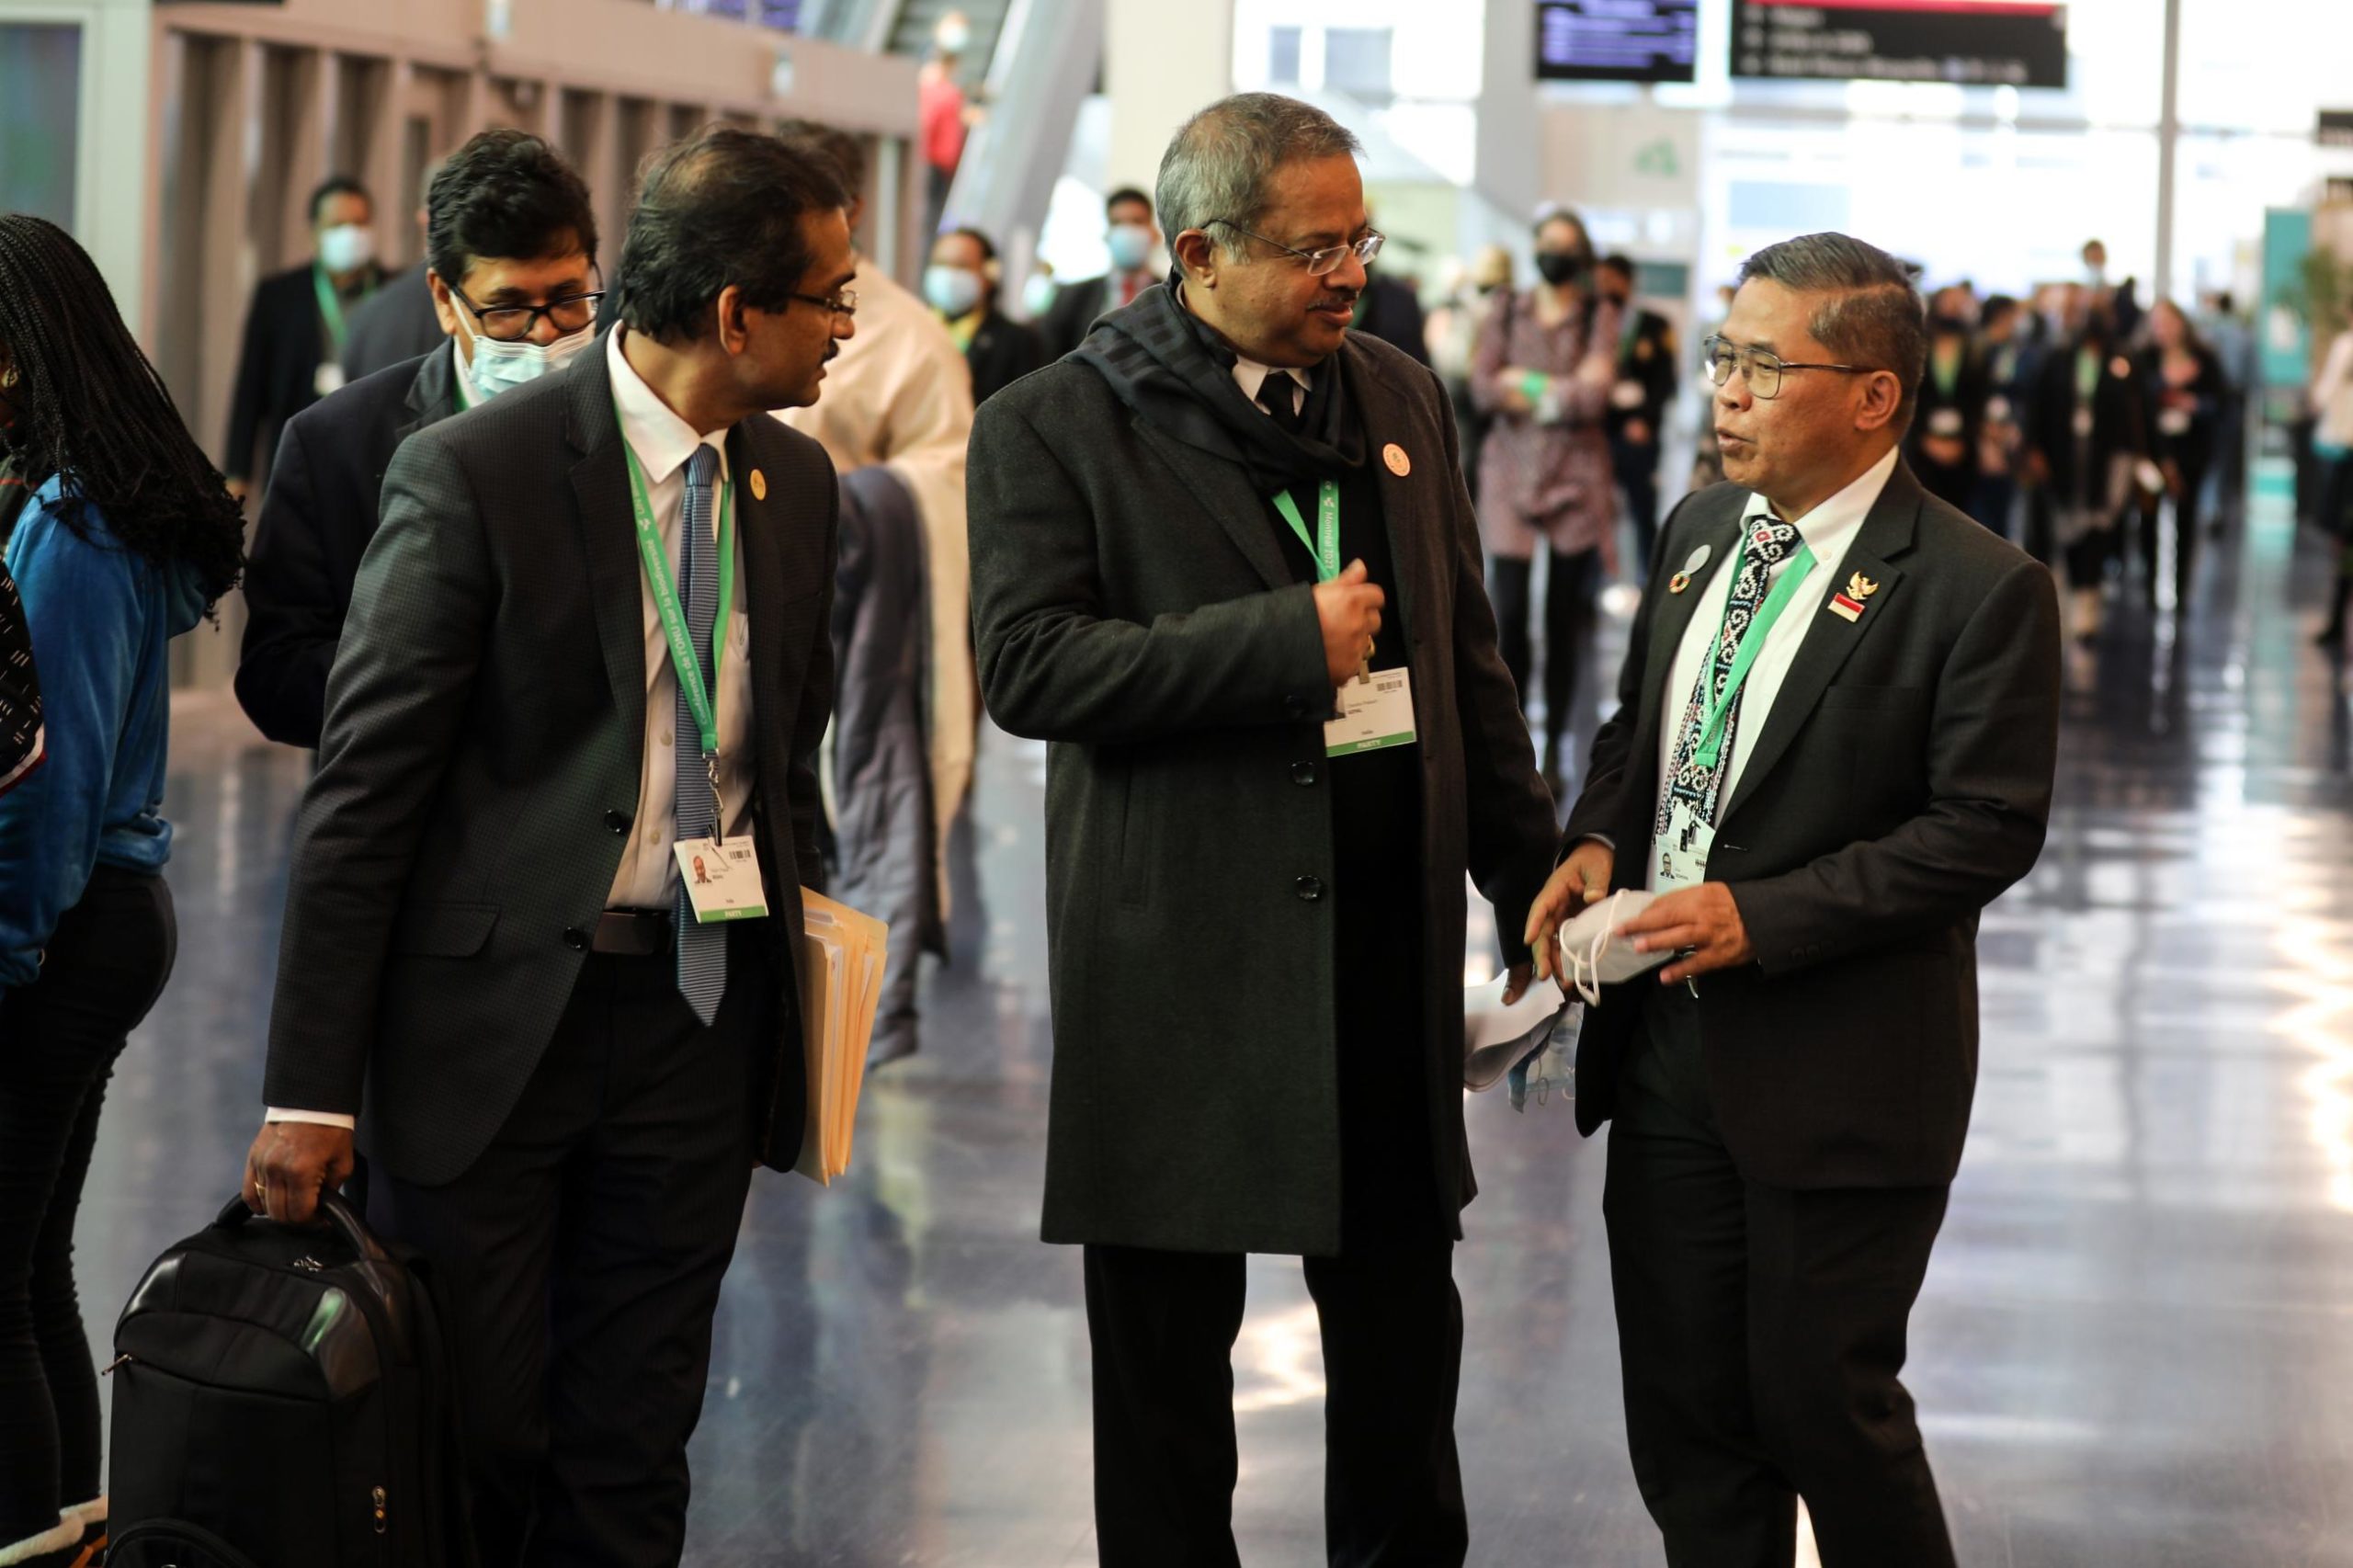 Raghu Prasad, India; Chandra Prakash Goyal, India; and Alue Dohong, Vice Minister of Environment and Forestry, Indonesia